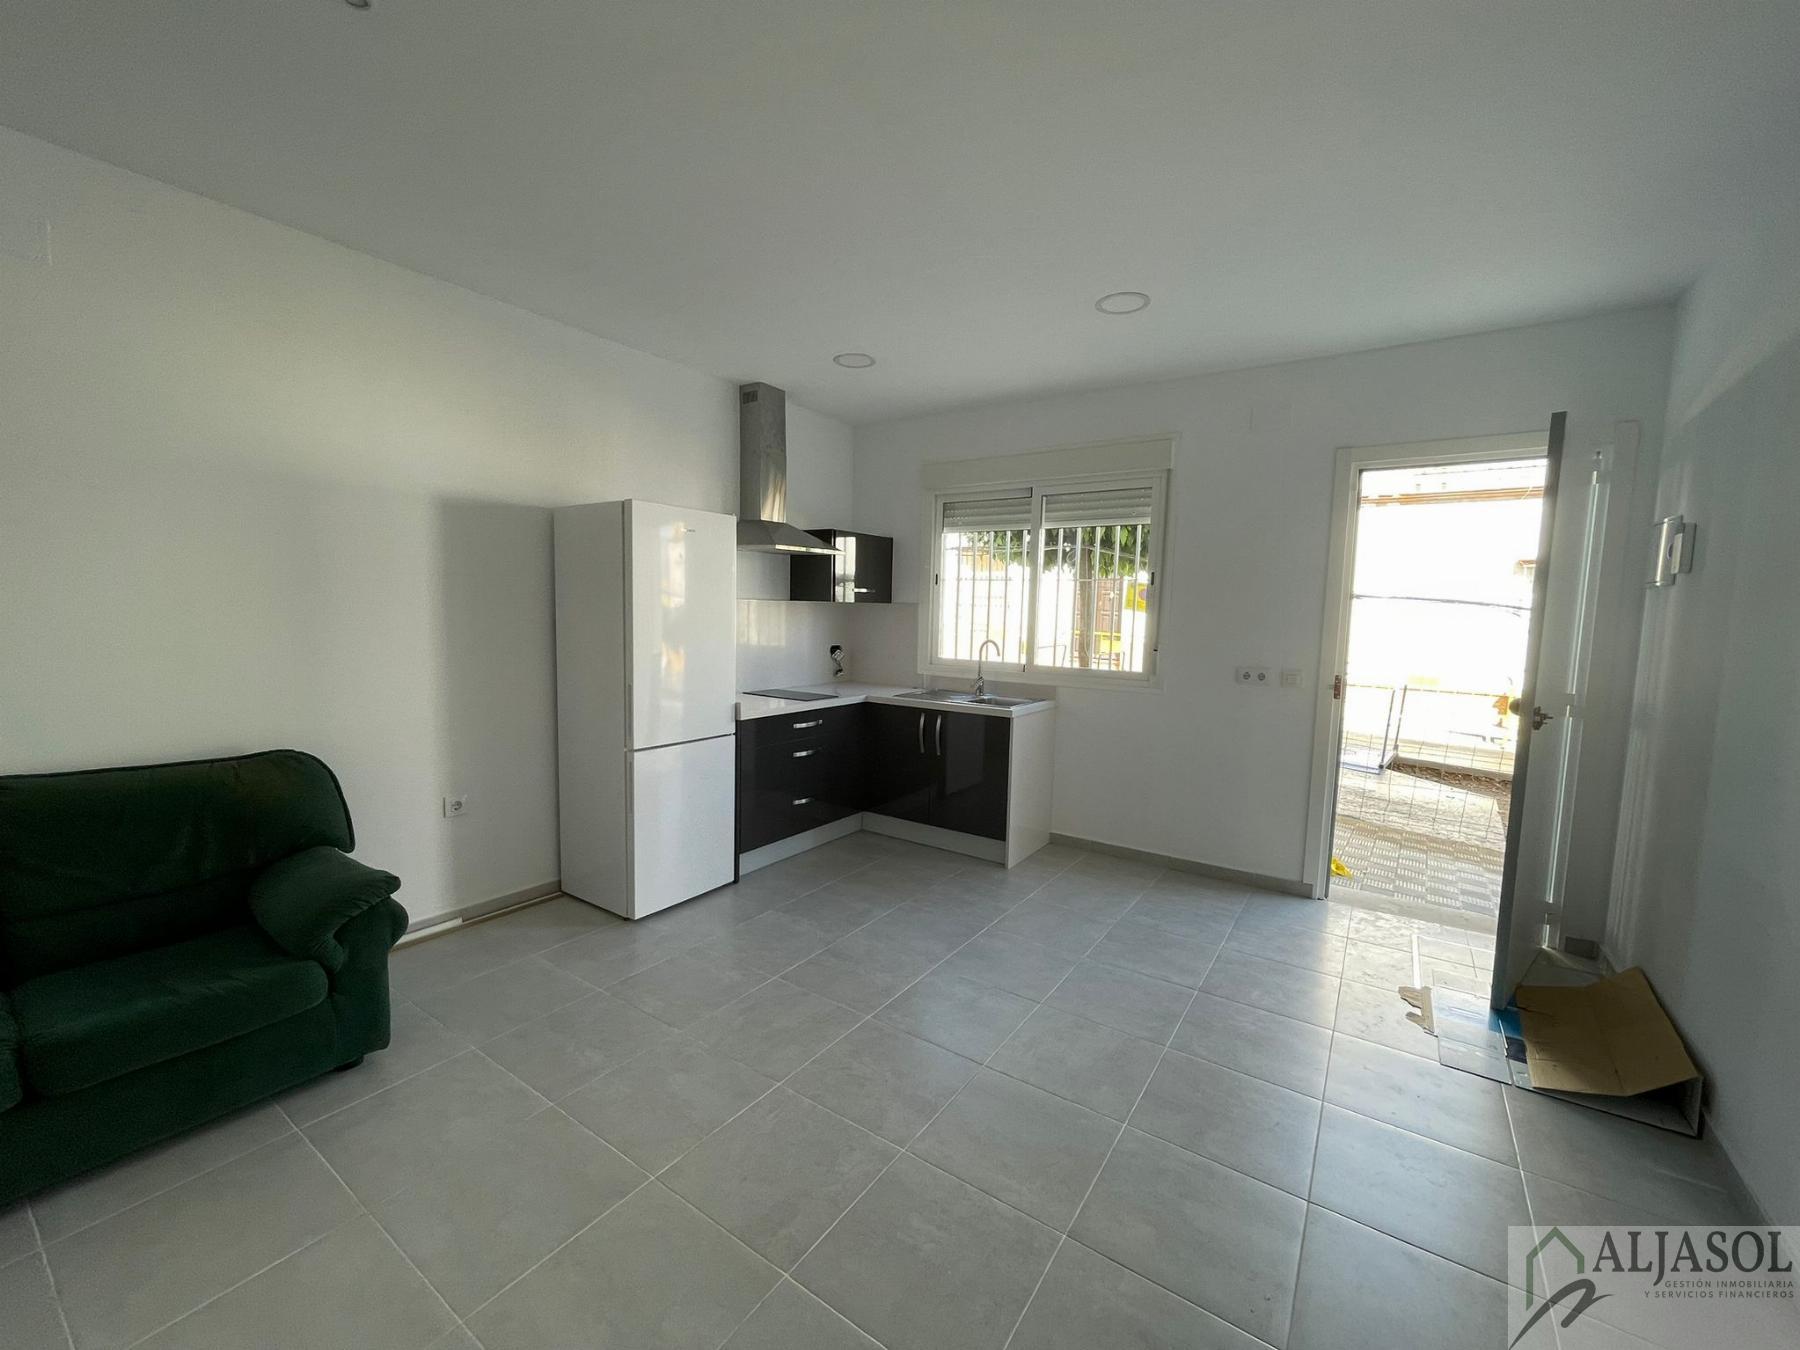 For rent of flat in Olivares